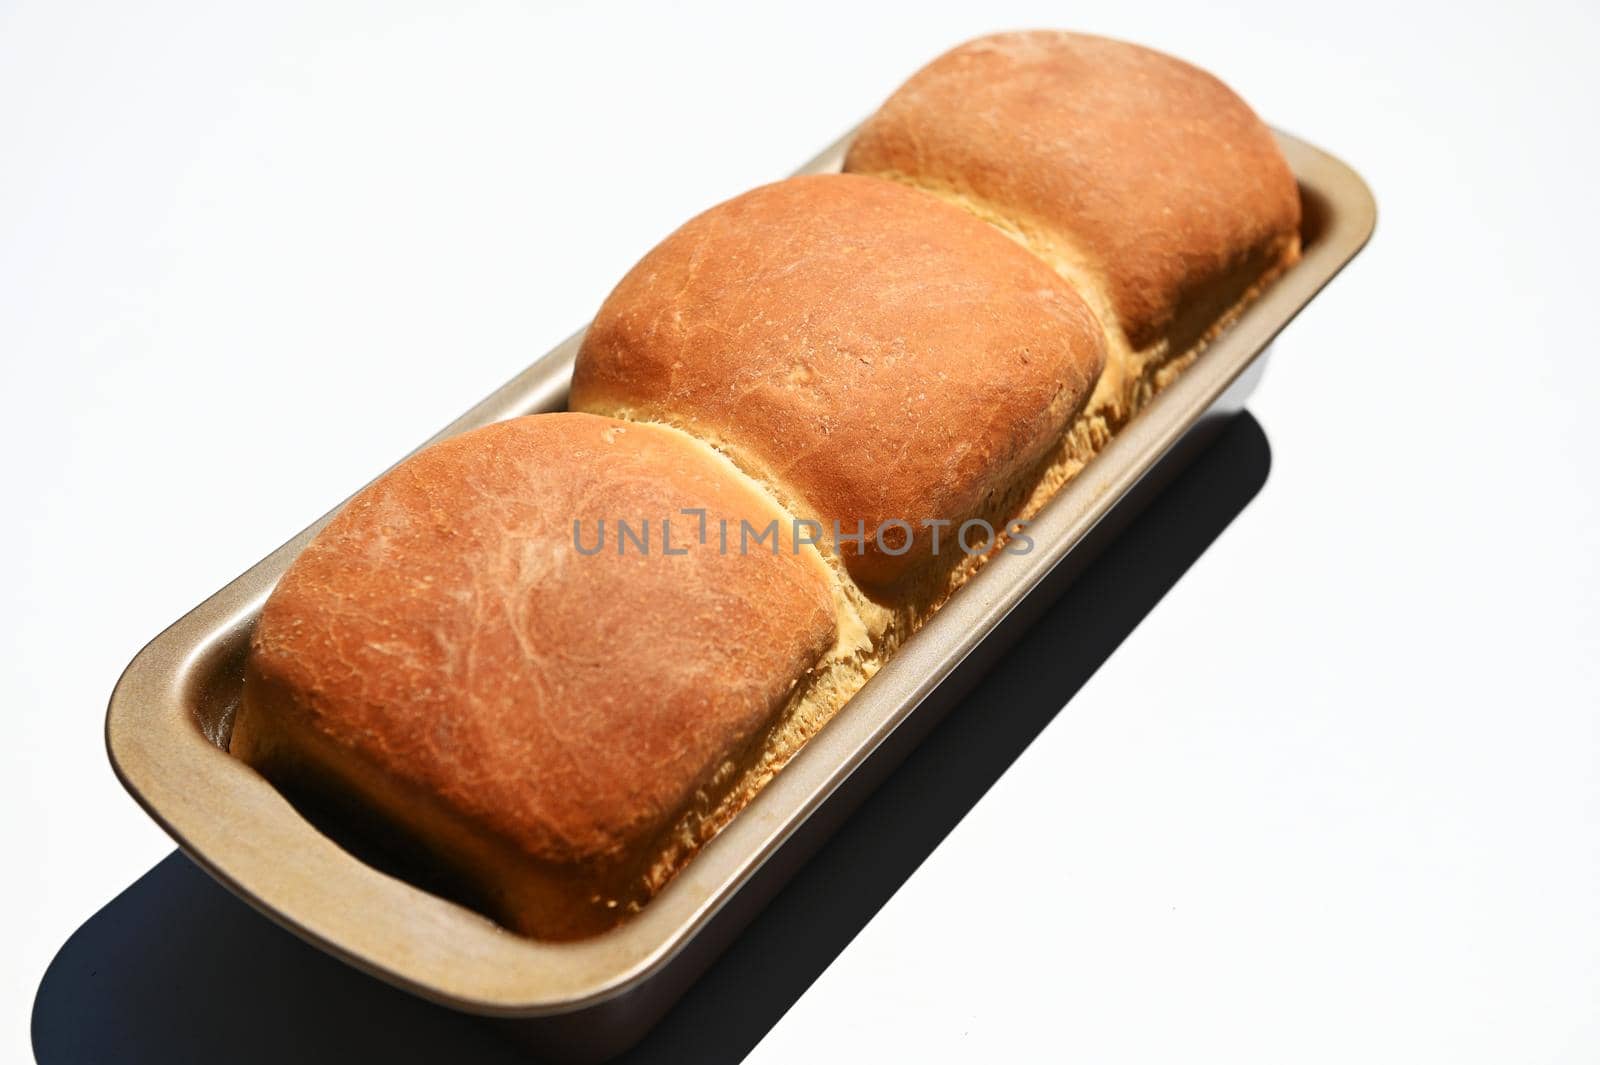 Close-up of a baking dish with freshly baked hot whole grain bread, isolated on white background with copy ad space for advertising text. Still life. Food composition. Flat lay